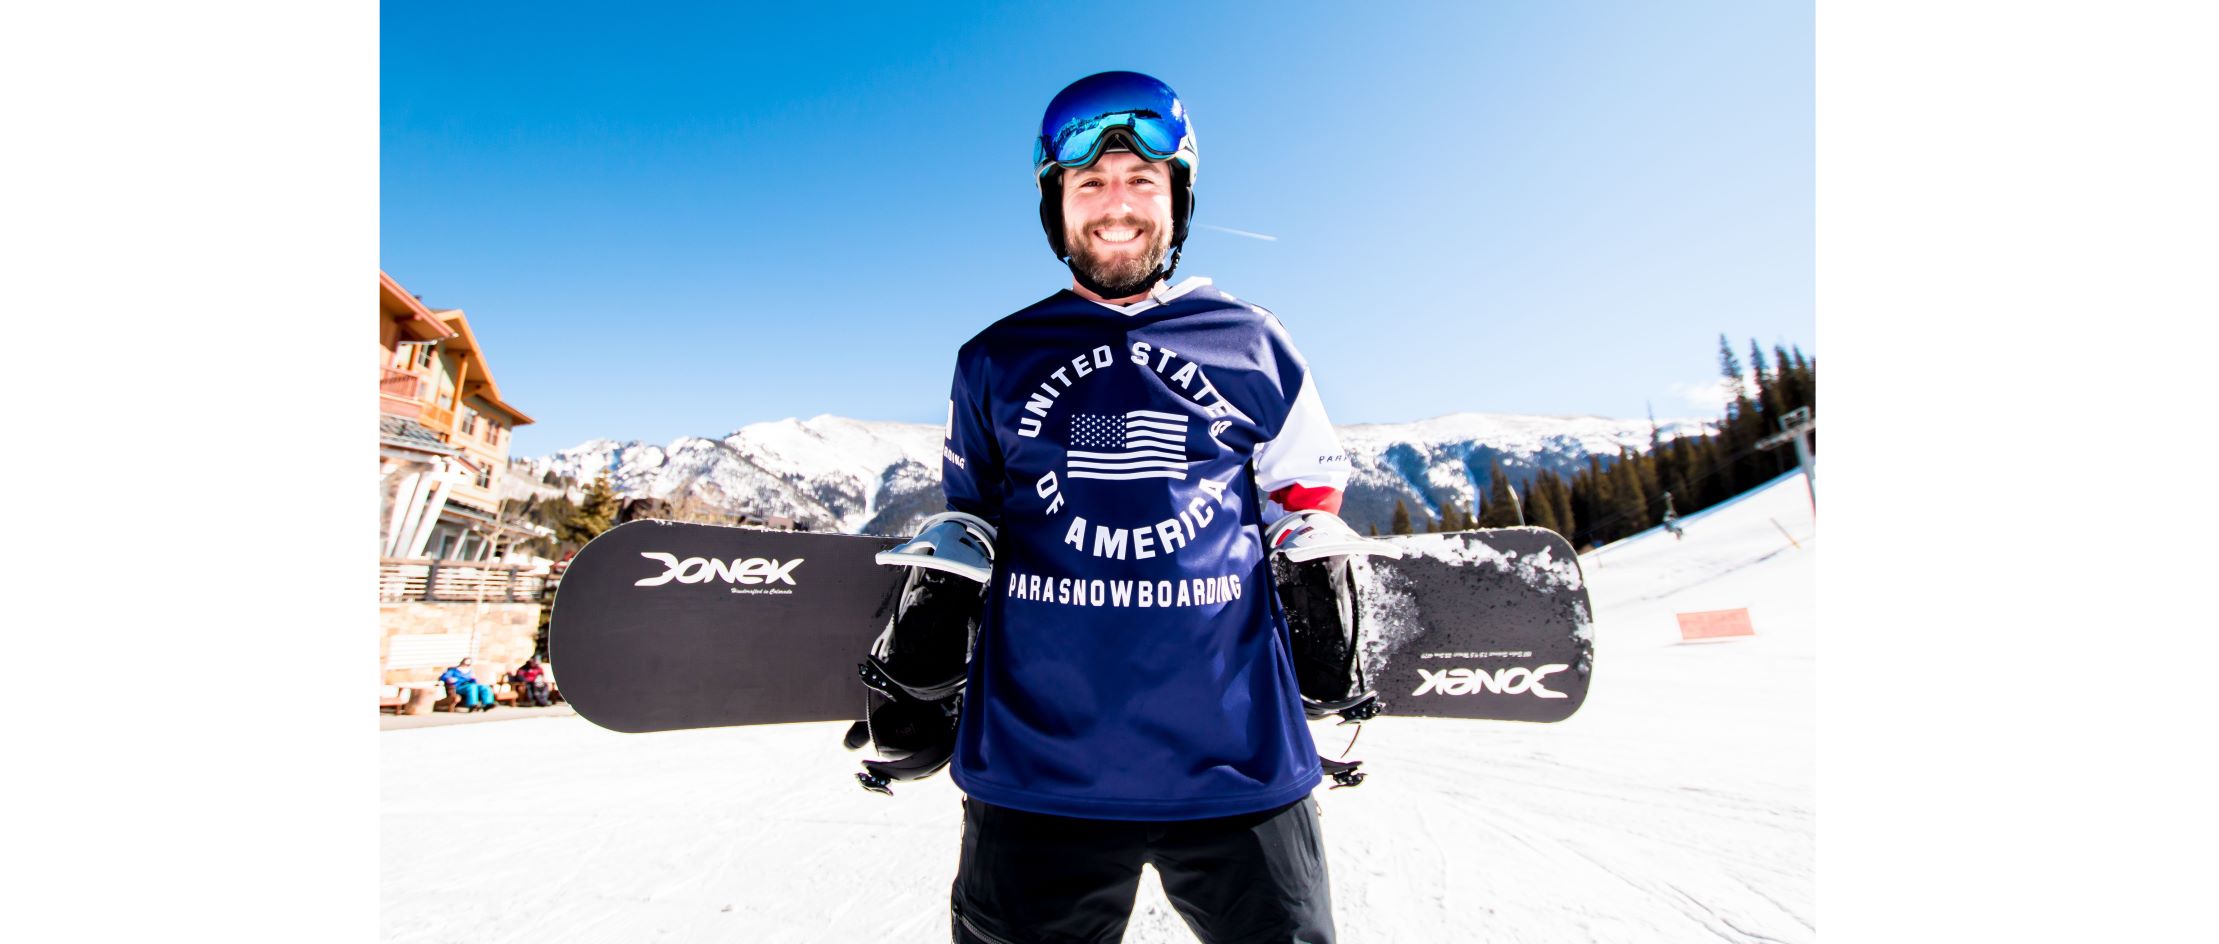 Michael Spivey 2022 USA Paralympic Snowboard Team